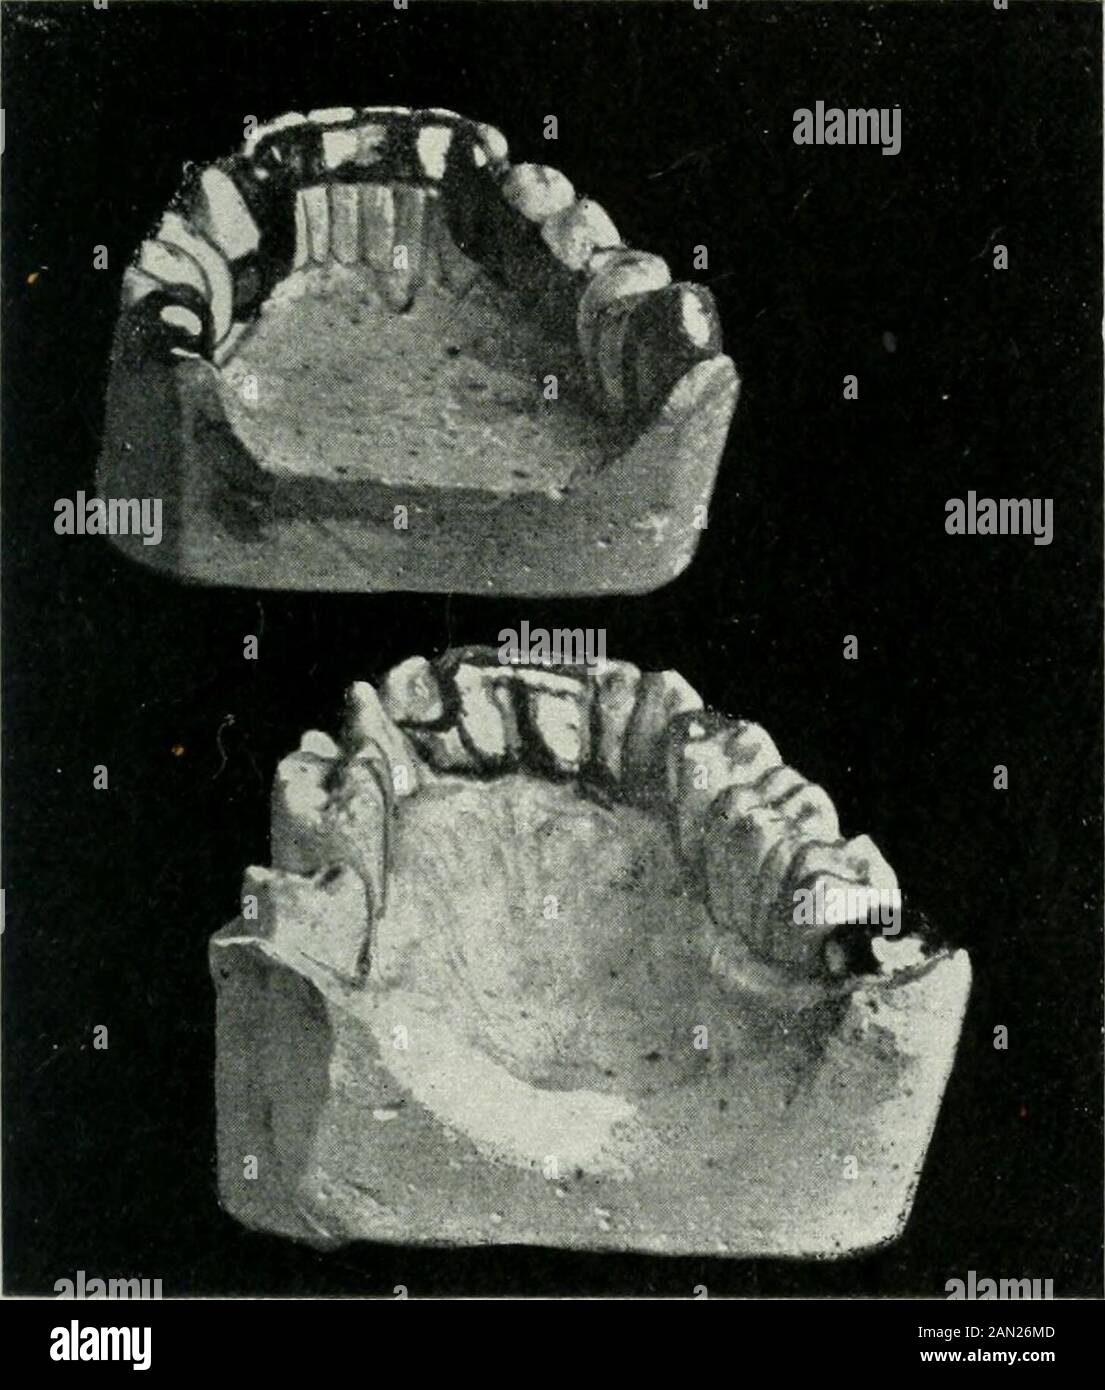 The tightening of loose teeth: some technical innovations . Lower and Uppkr Taw of a Mouth Badly Deformed byObliquity of the Teeth. (In the mouth for three years.) Procedure.— Upper Figure, Loiver Jaw.—Haii double-capped canines con-nected by means of splint; right and left bicuspid tube teeth. Loirer Figure, Upper Jarv.—After previous regulation,bridges serving as retaining appliances. Bight: Pure gold collar, tube tooth, collar on bicuspid. Left: Collar, crown, bicuspids, tube teeth. Front: Tube teeth. 67 PL ATE VTI. Lower and Upper Jaws : Loosening of Teeth due toUncleanliness and Powerful Stock Photo